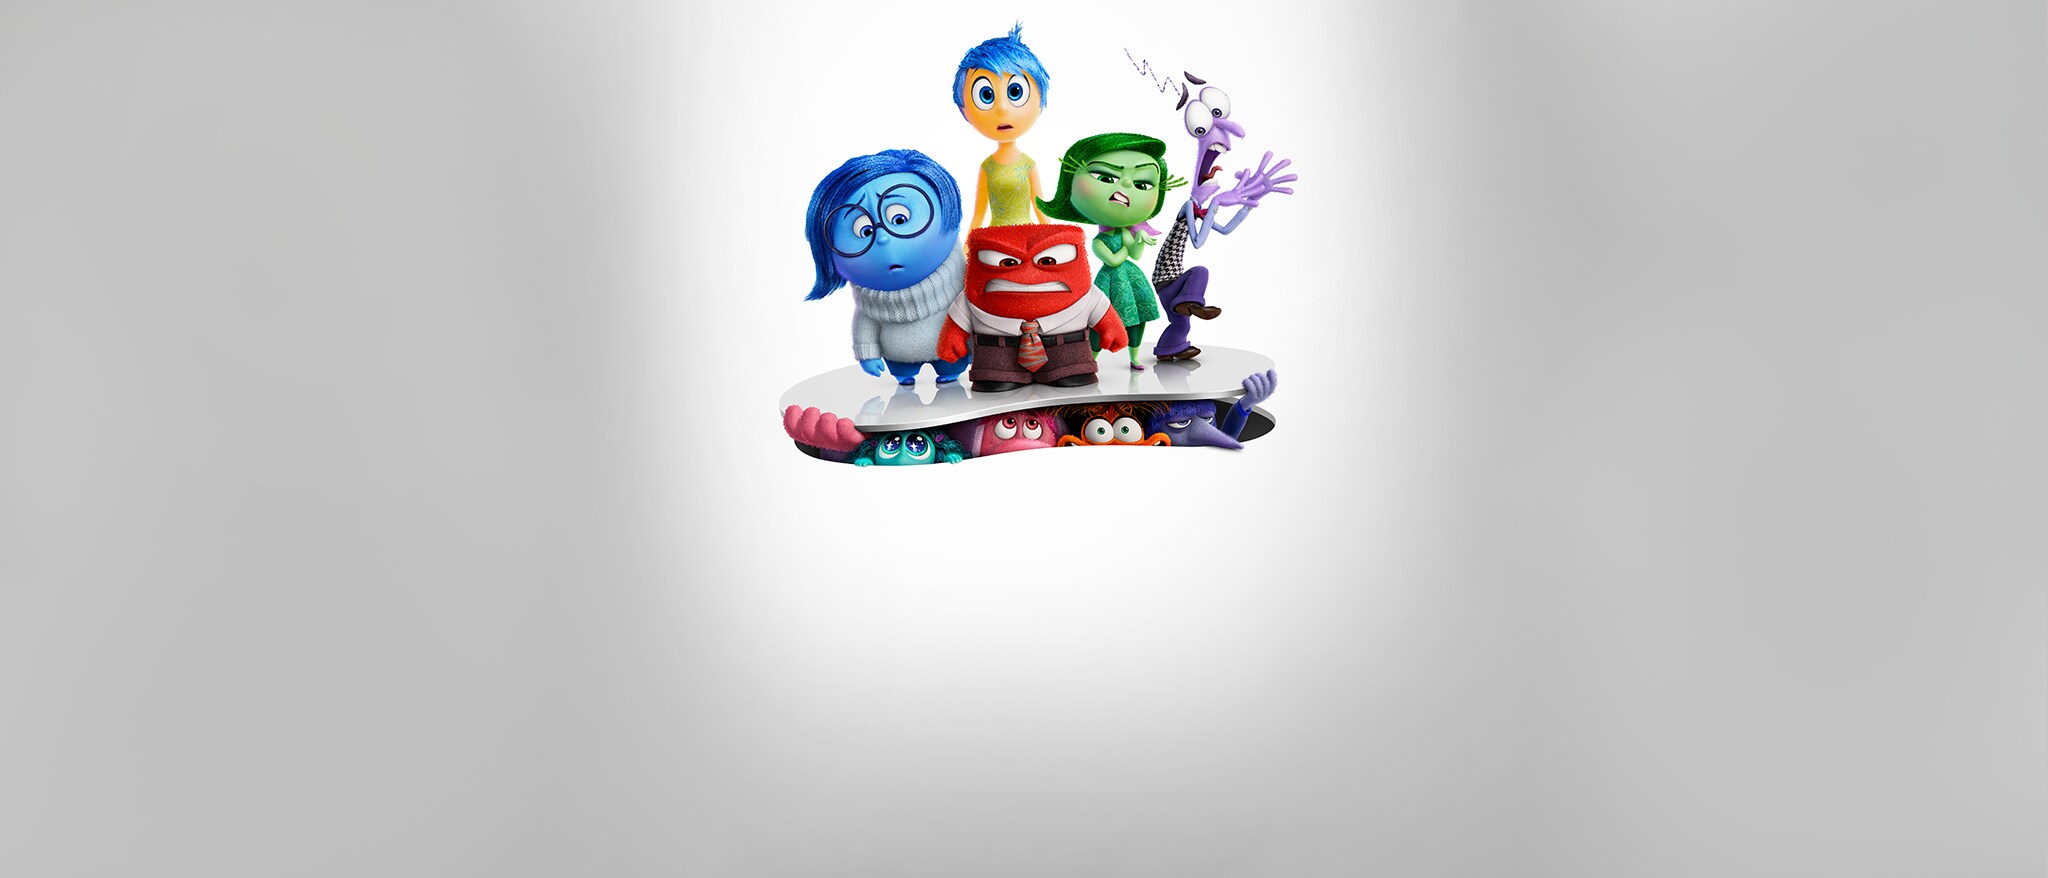 Inside Out 2 - Featured Content Banner